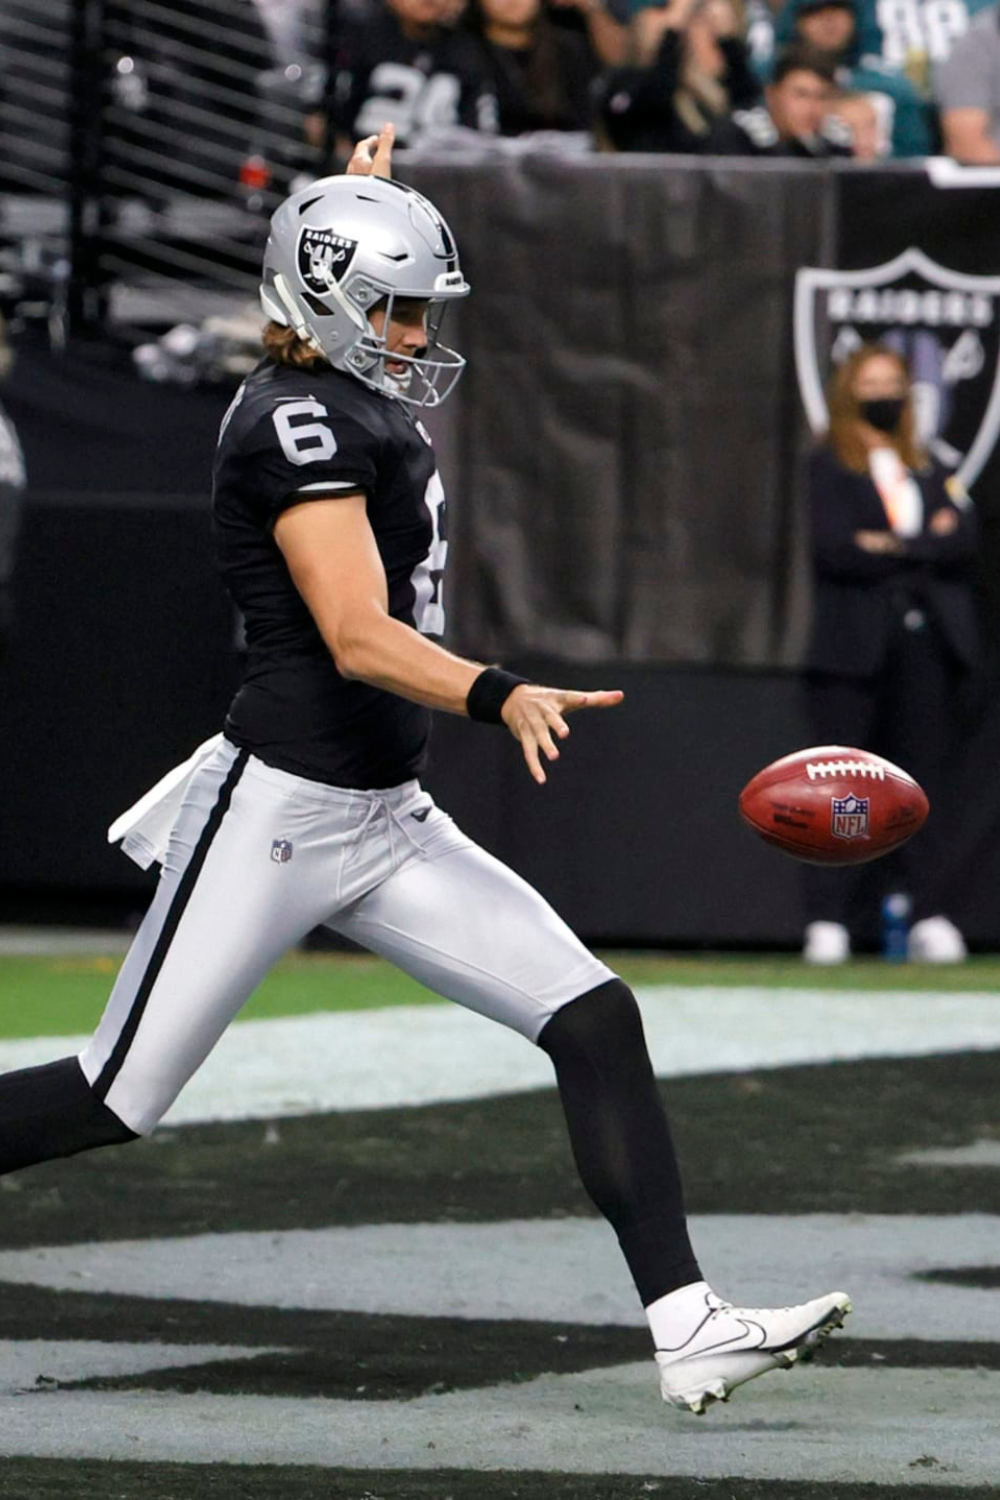 A.J. Cole, Punter For The Raiders